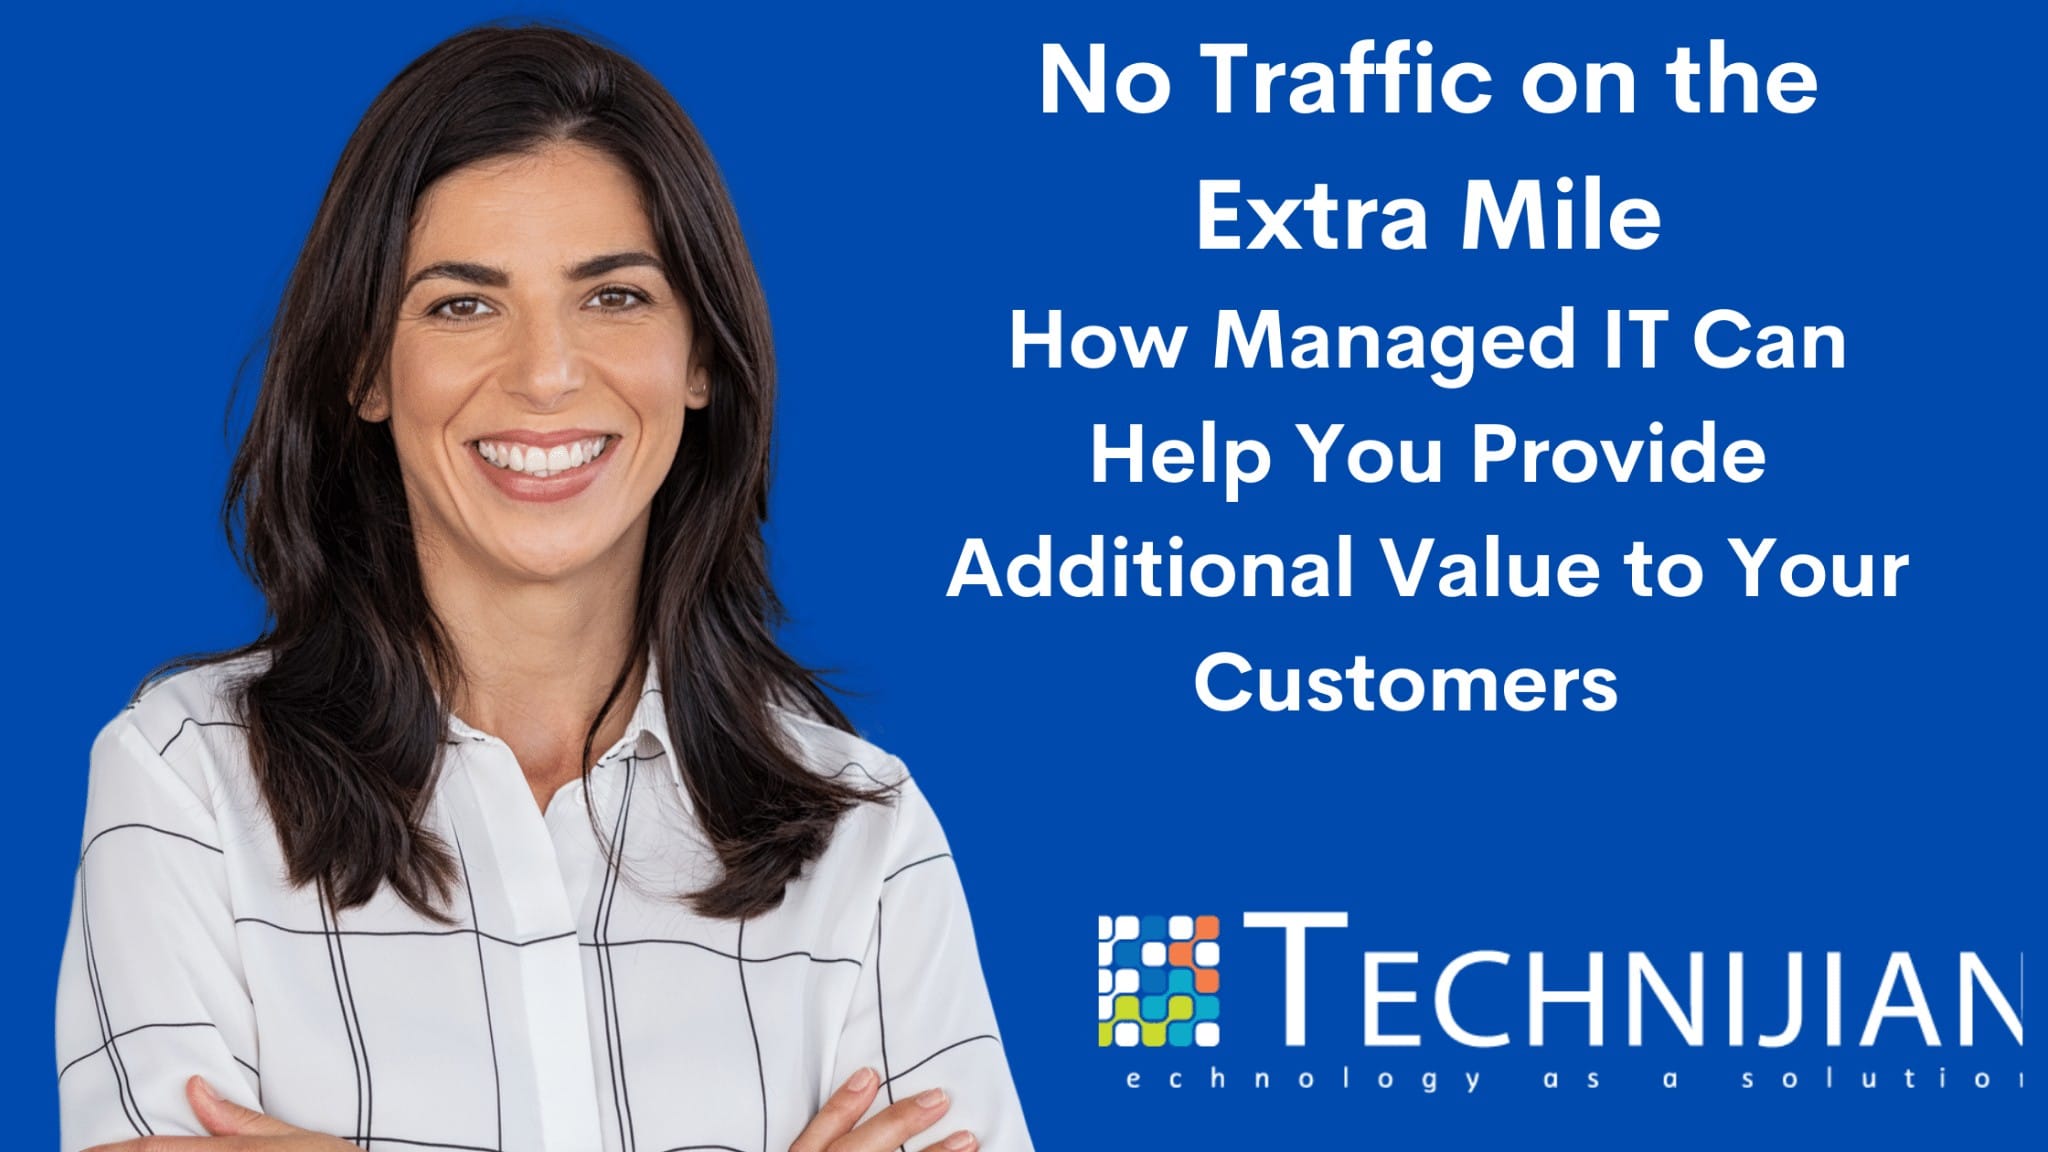 No Traffic on the Extra Mile_ How Managed IT Can Help You Provide Additional Value to Your Customers (1)